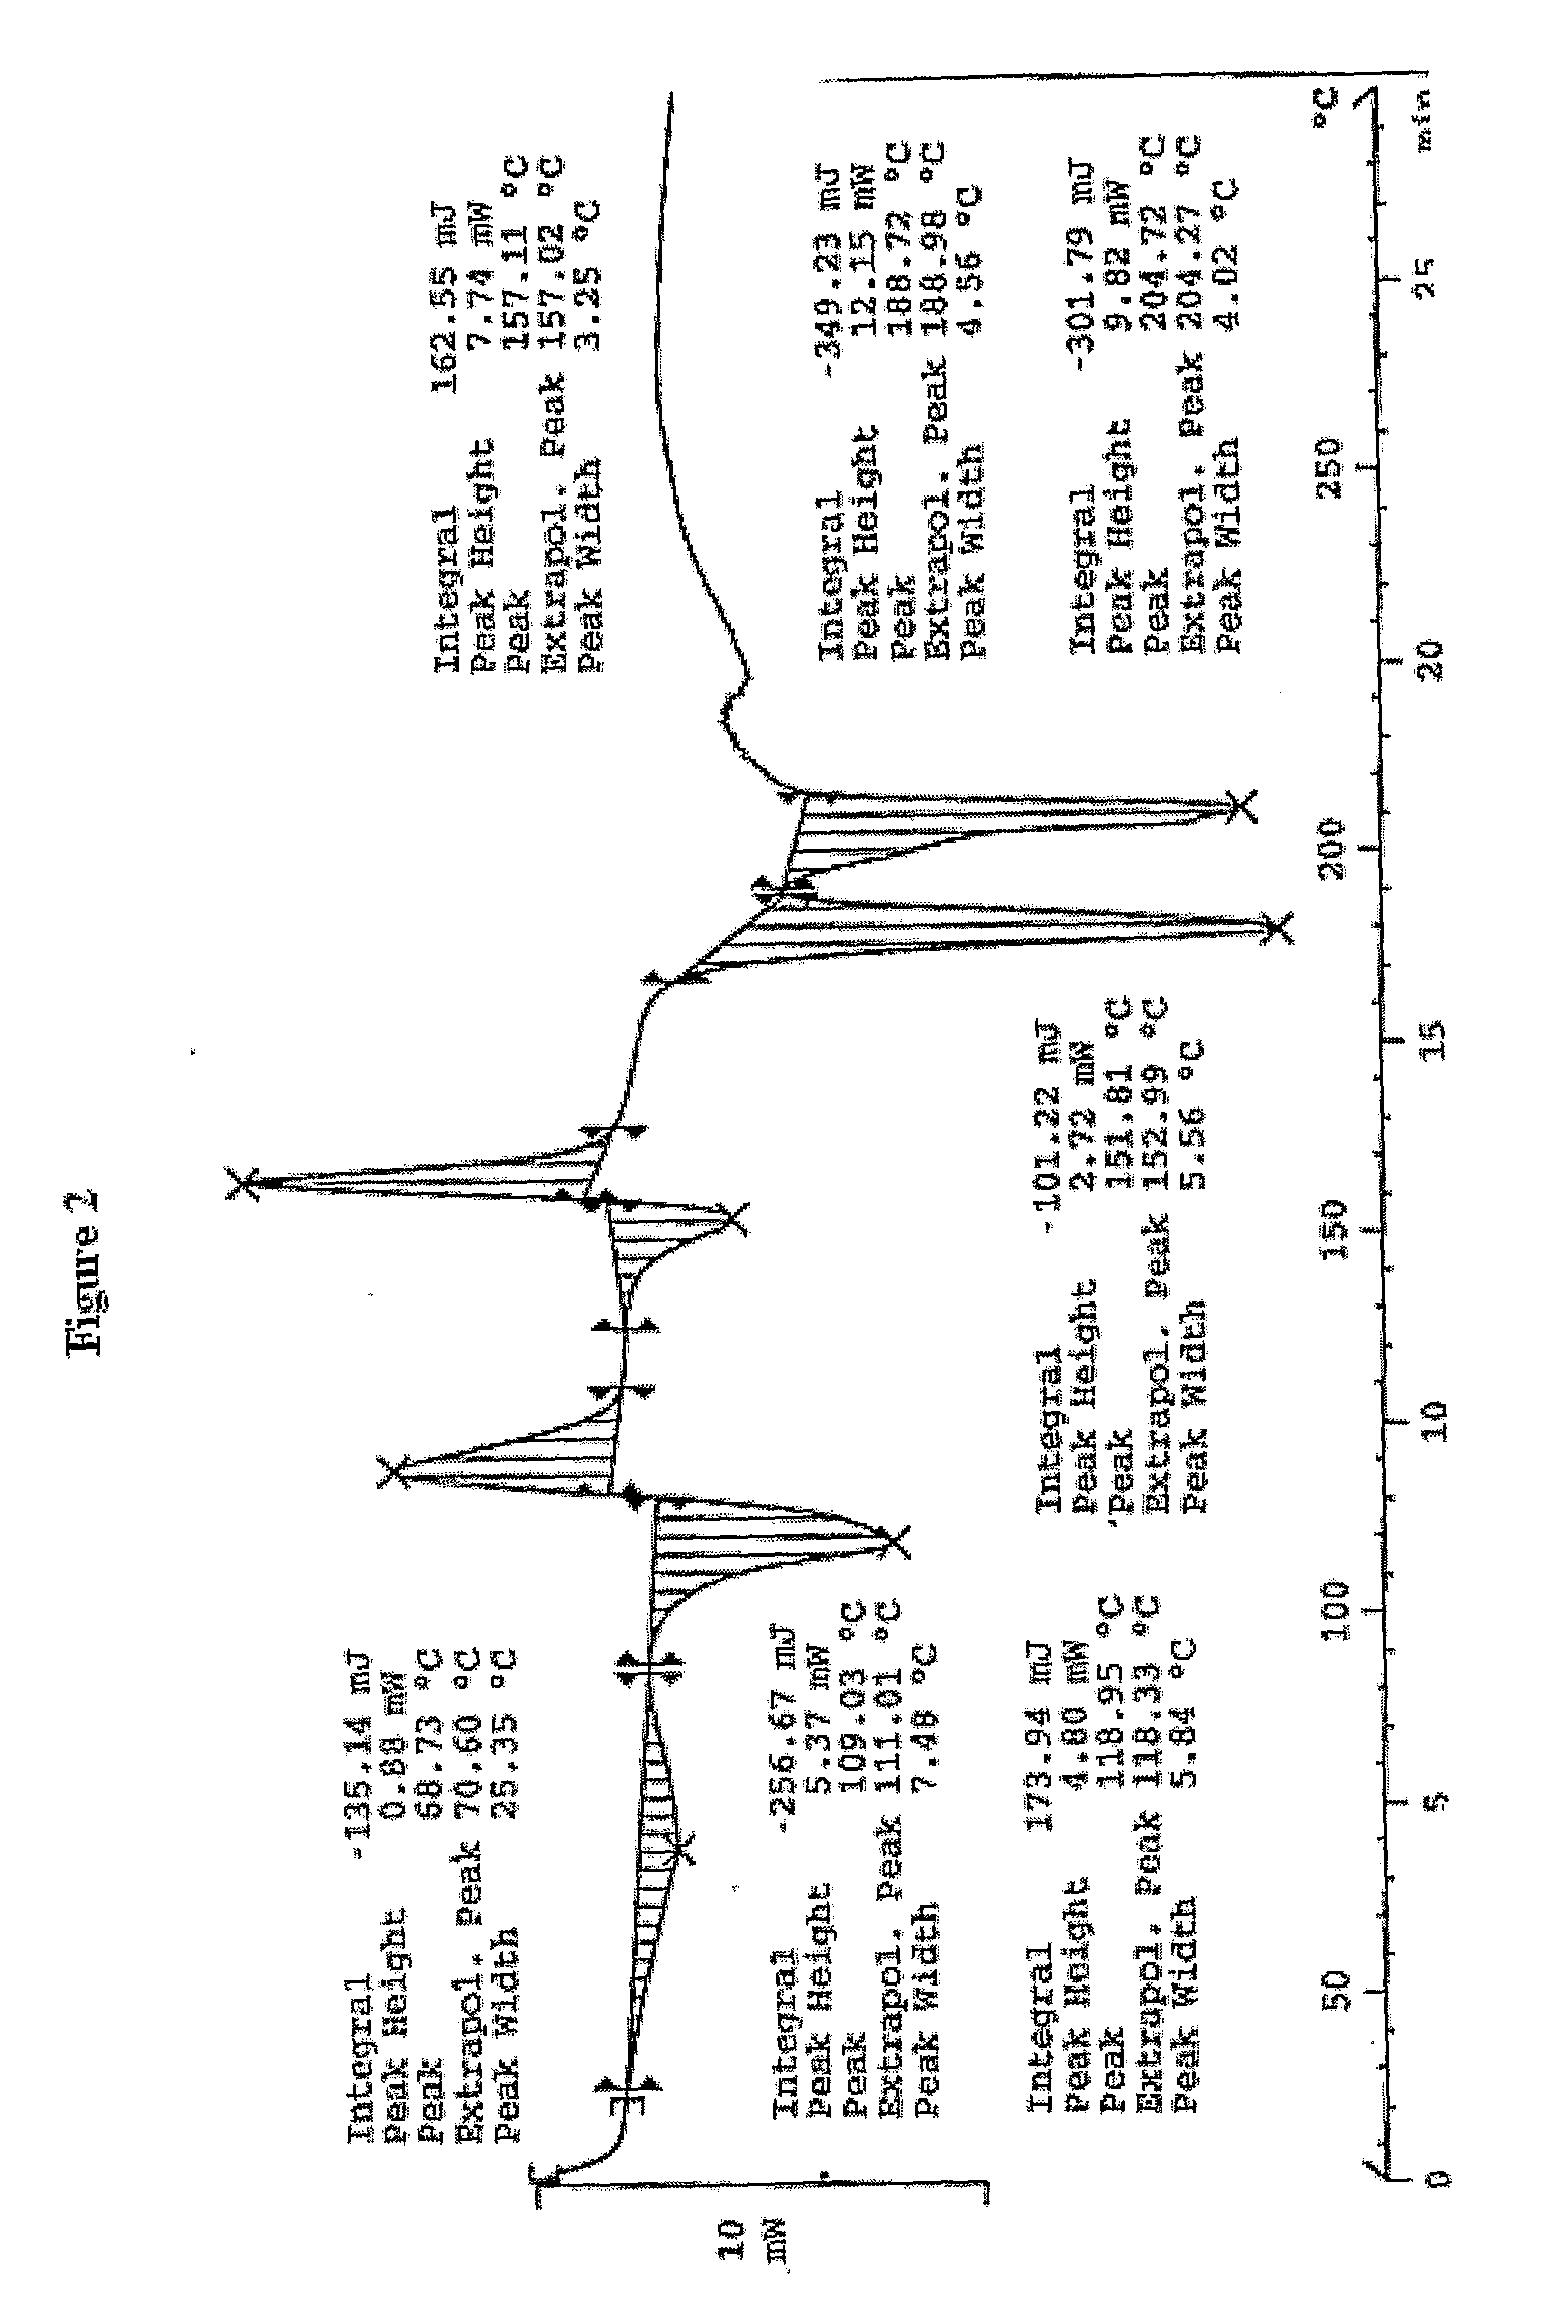 Processes for the Preparation of Zolpidem and its Hemitartrate